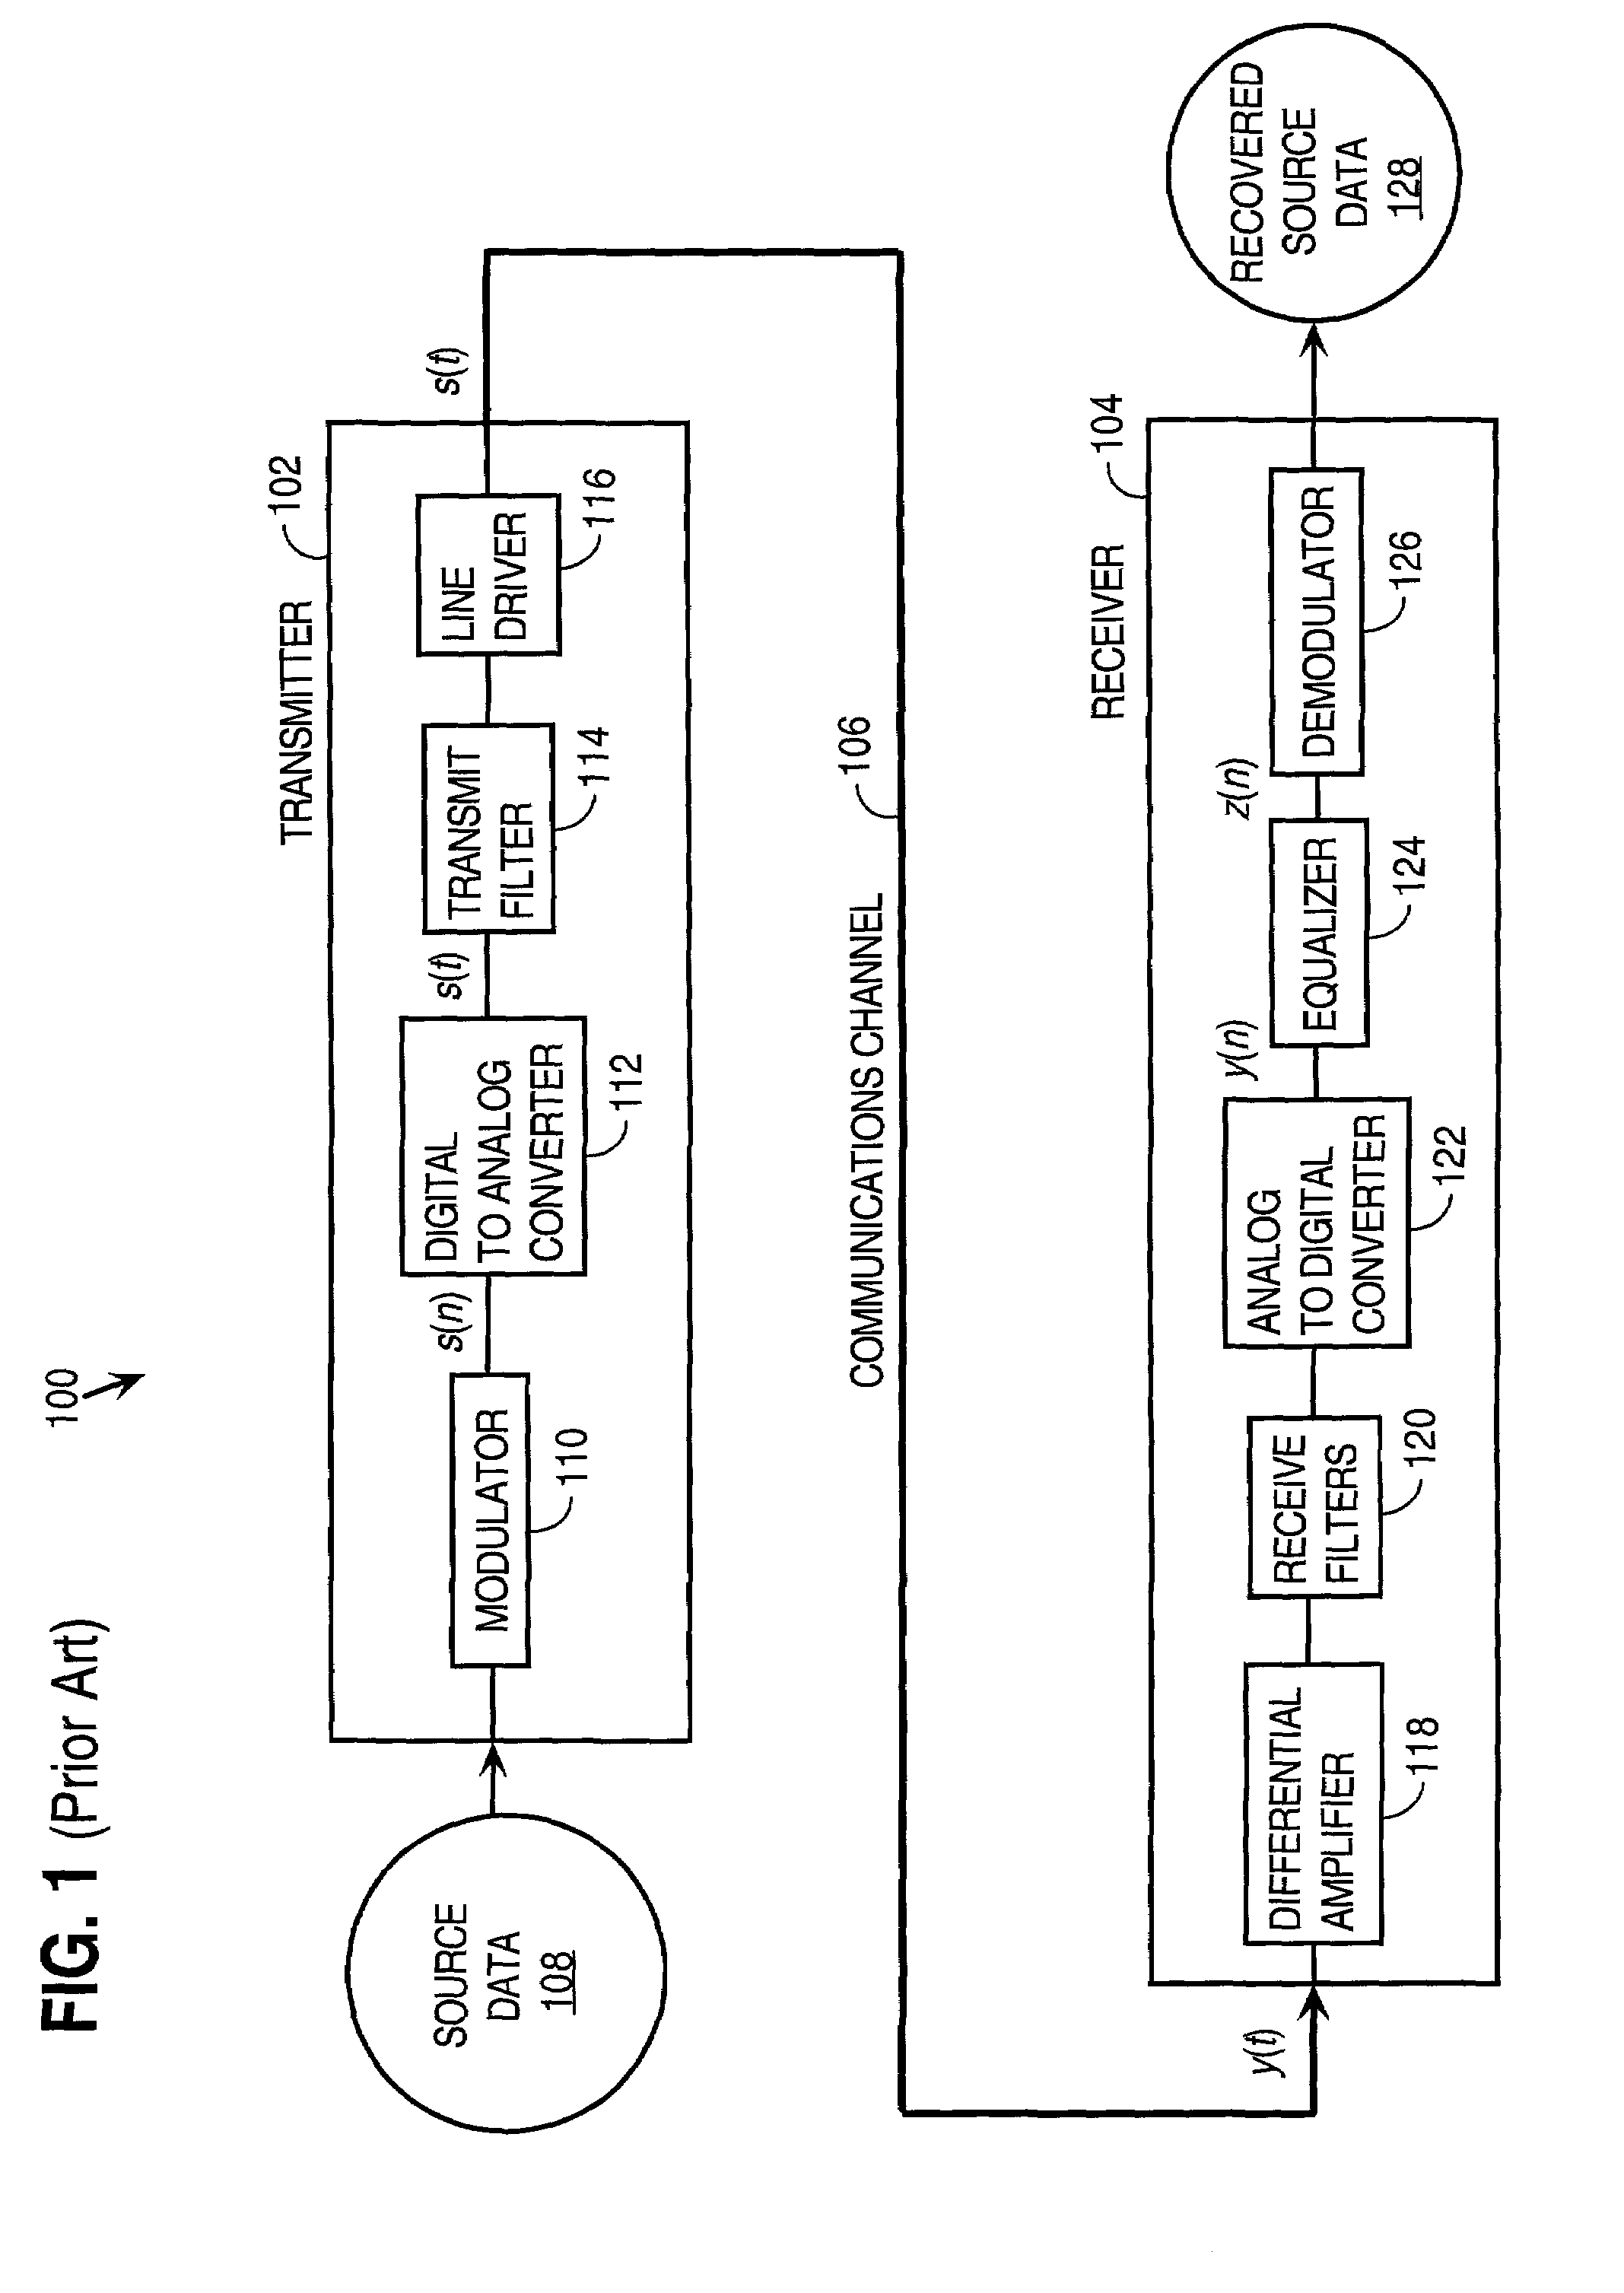 Approach for processing data received from a communications channel to reduce noise power and optimize impulse response length to reduce inter-symbol interference and inter-channel interference